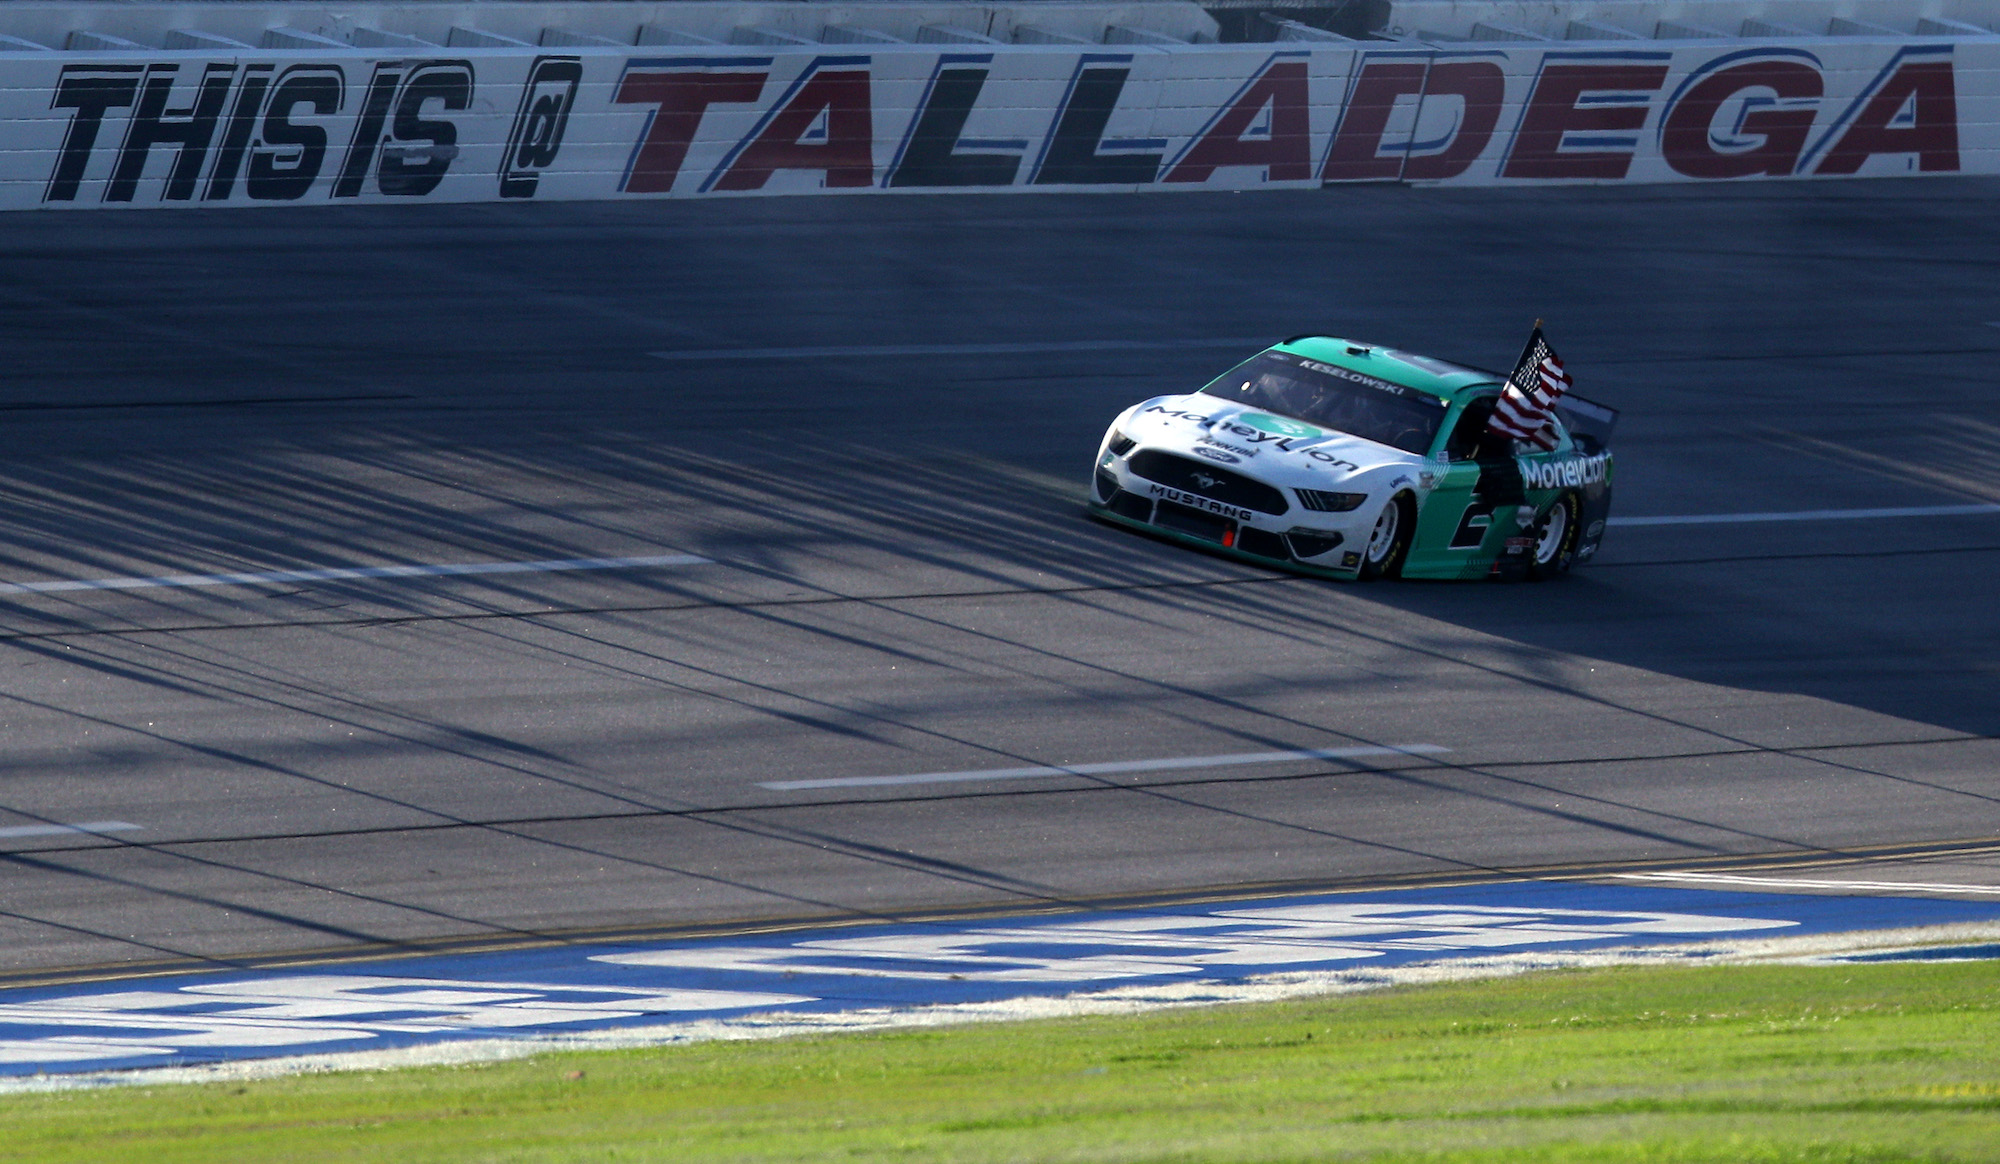 Brad Keselowski Doesn’t Get Scared Often When Racing but Did During Last Year’s Winning Race at Talladega